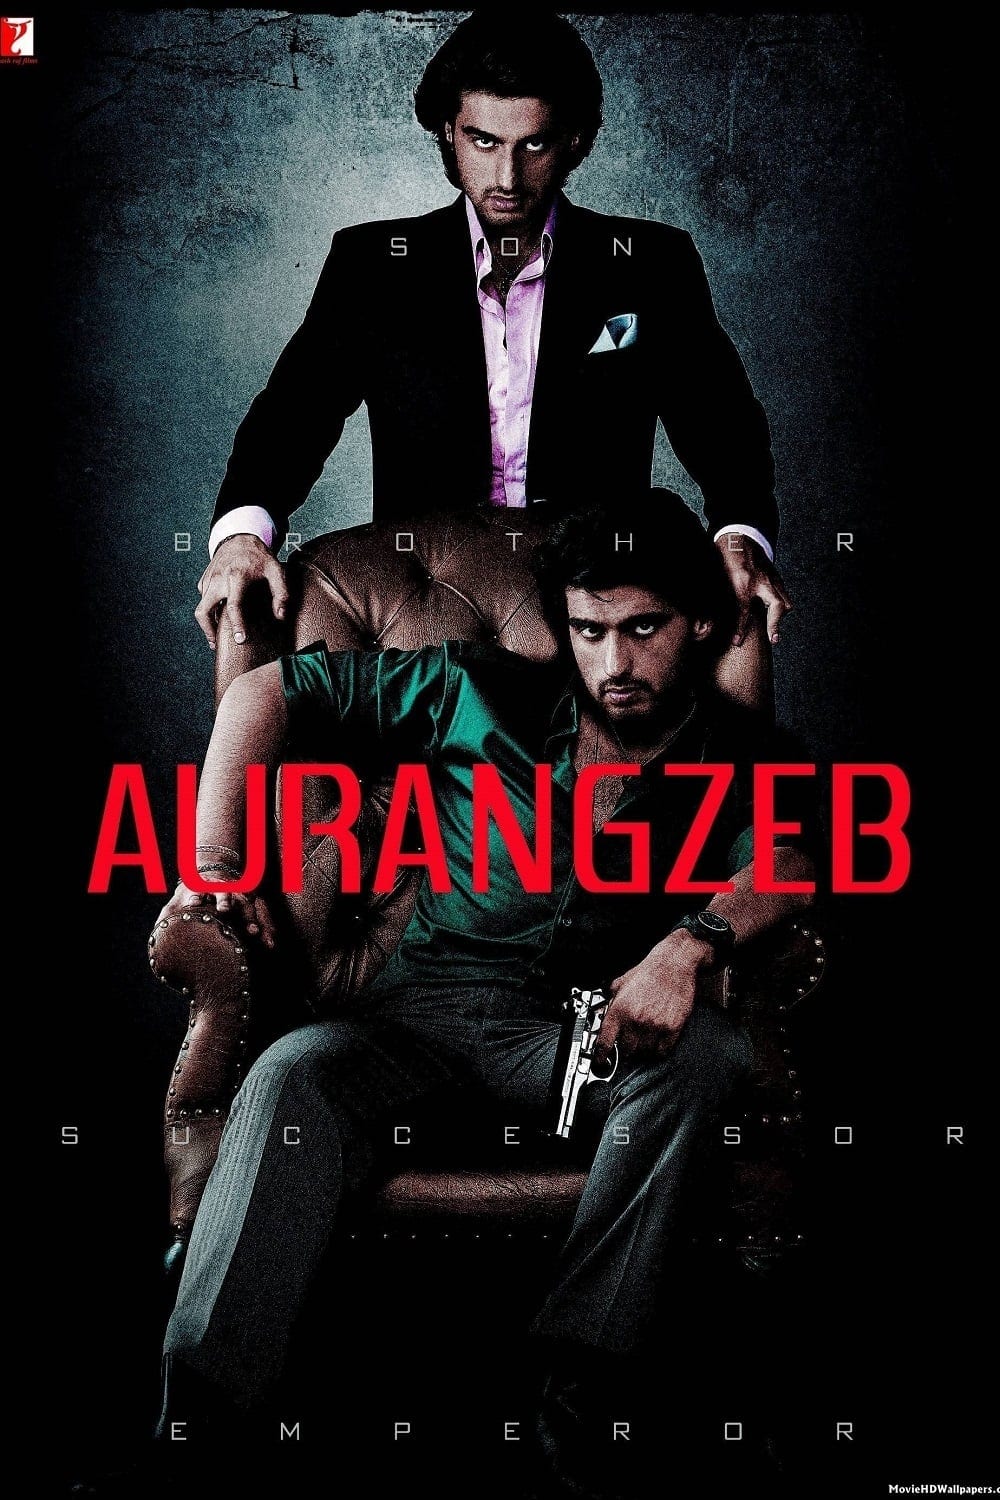 Poster for the movie "Aurangzeb"